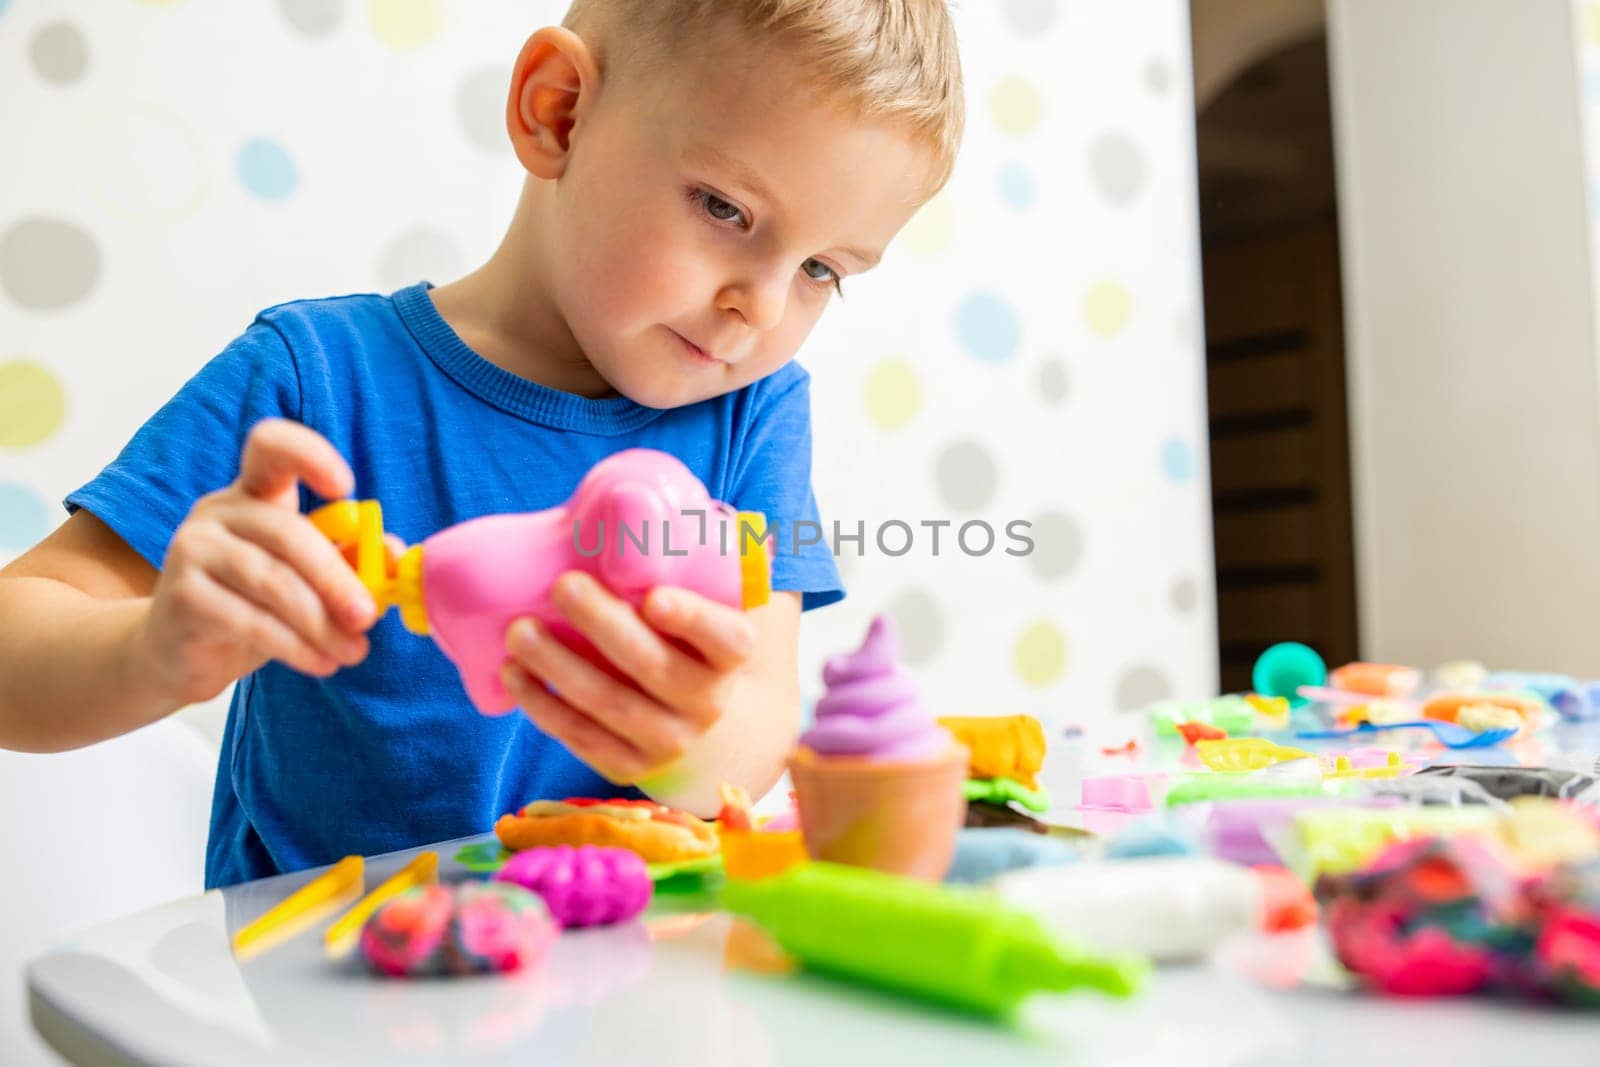 Kids playing with play dough. Cute children sitting at the table and plays with playdough. Creative leisure activity concept